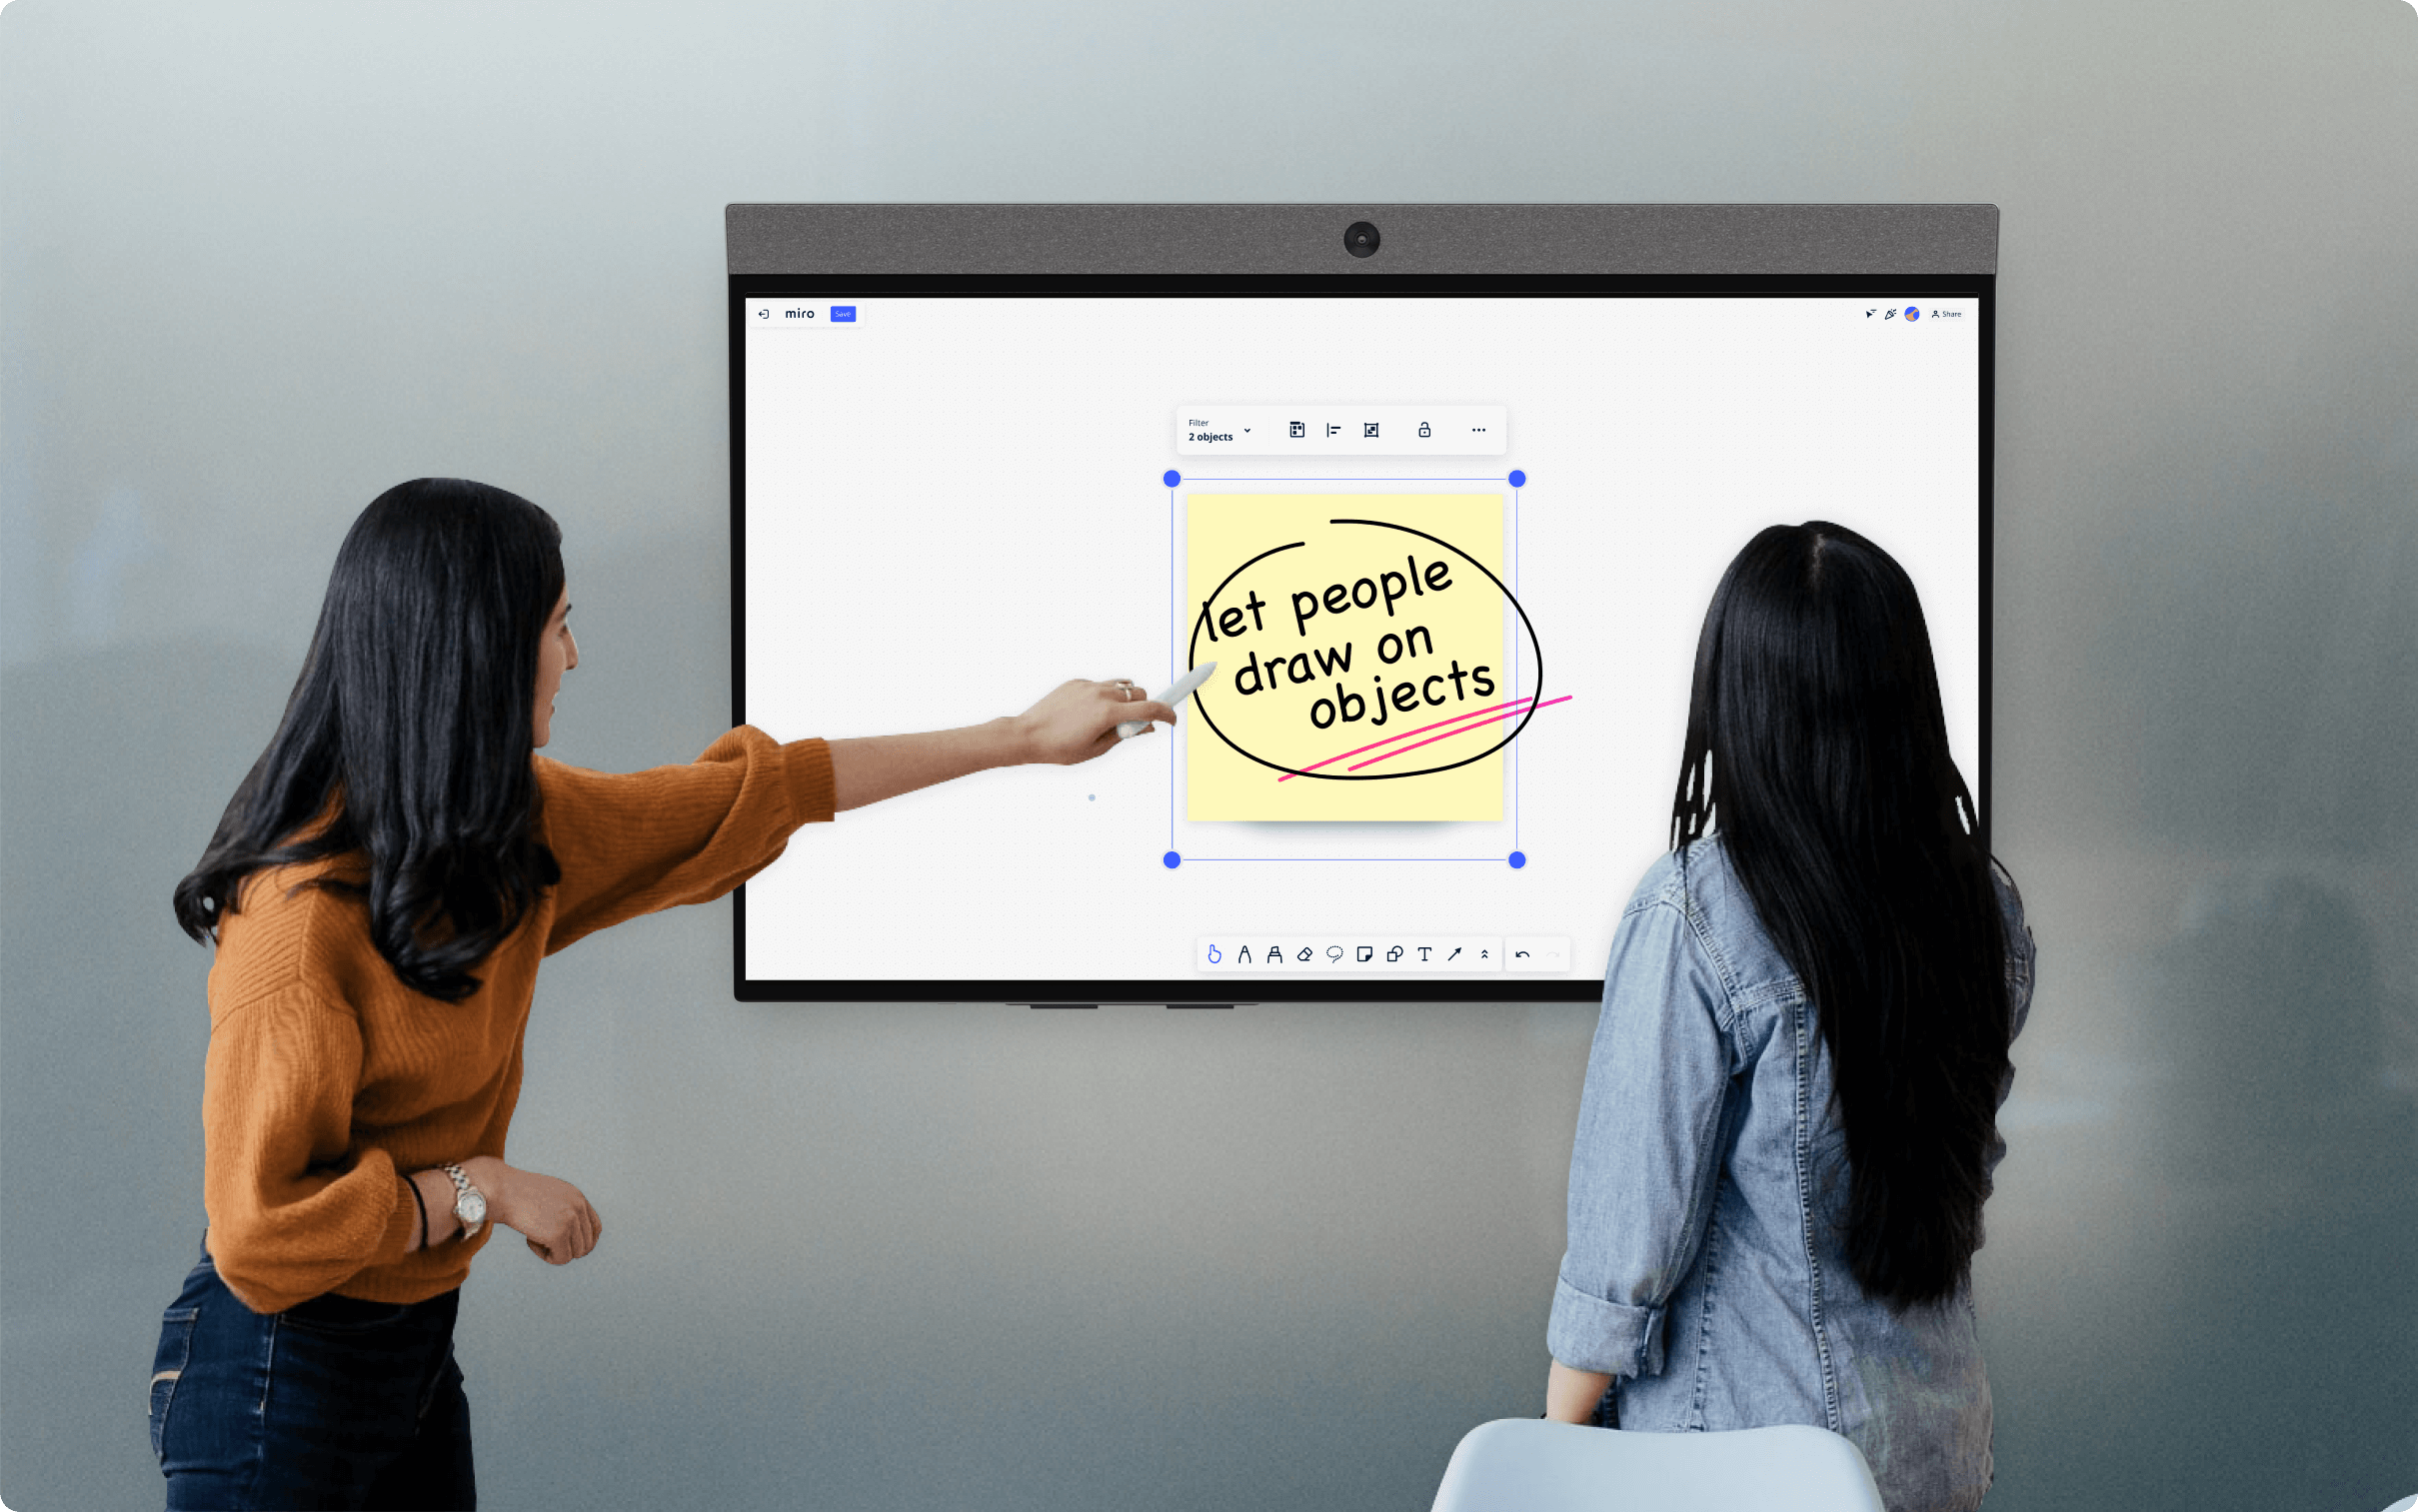 Time to play: a digital whiteboard for those who want to have fun -  Templates